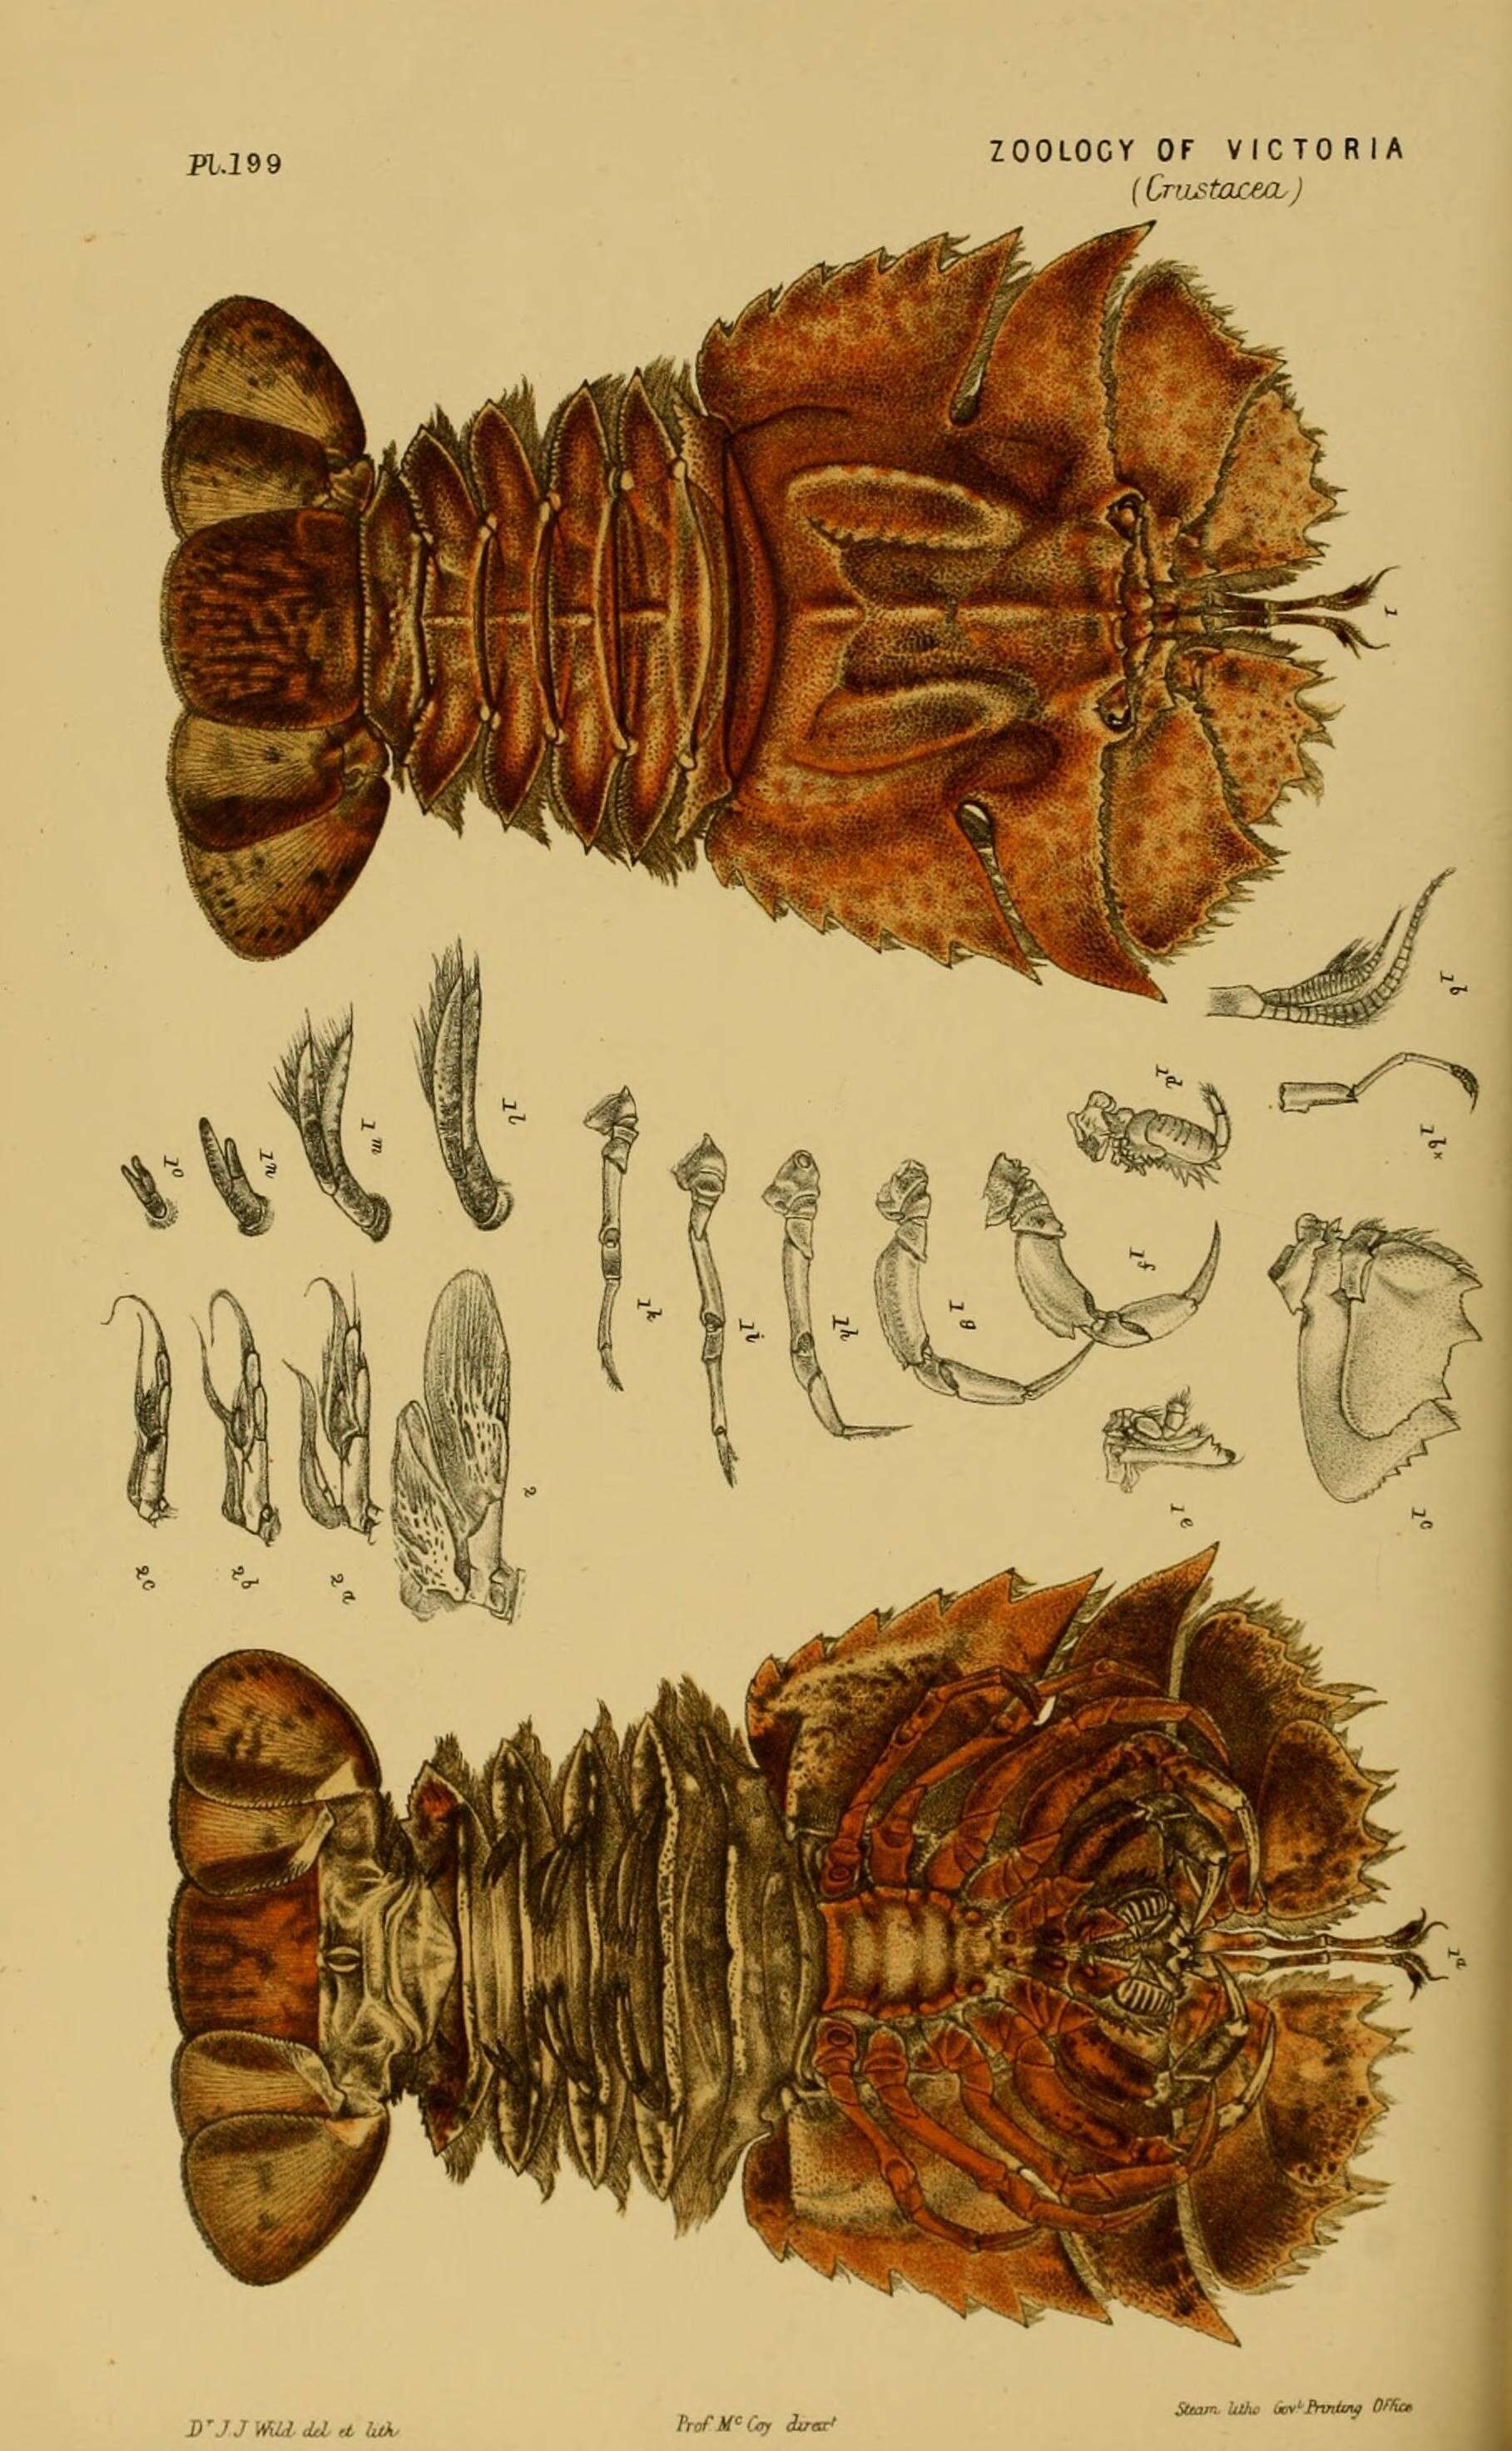 Image of slipper lobsters